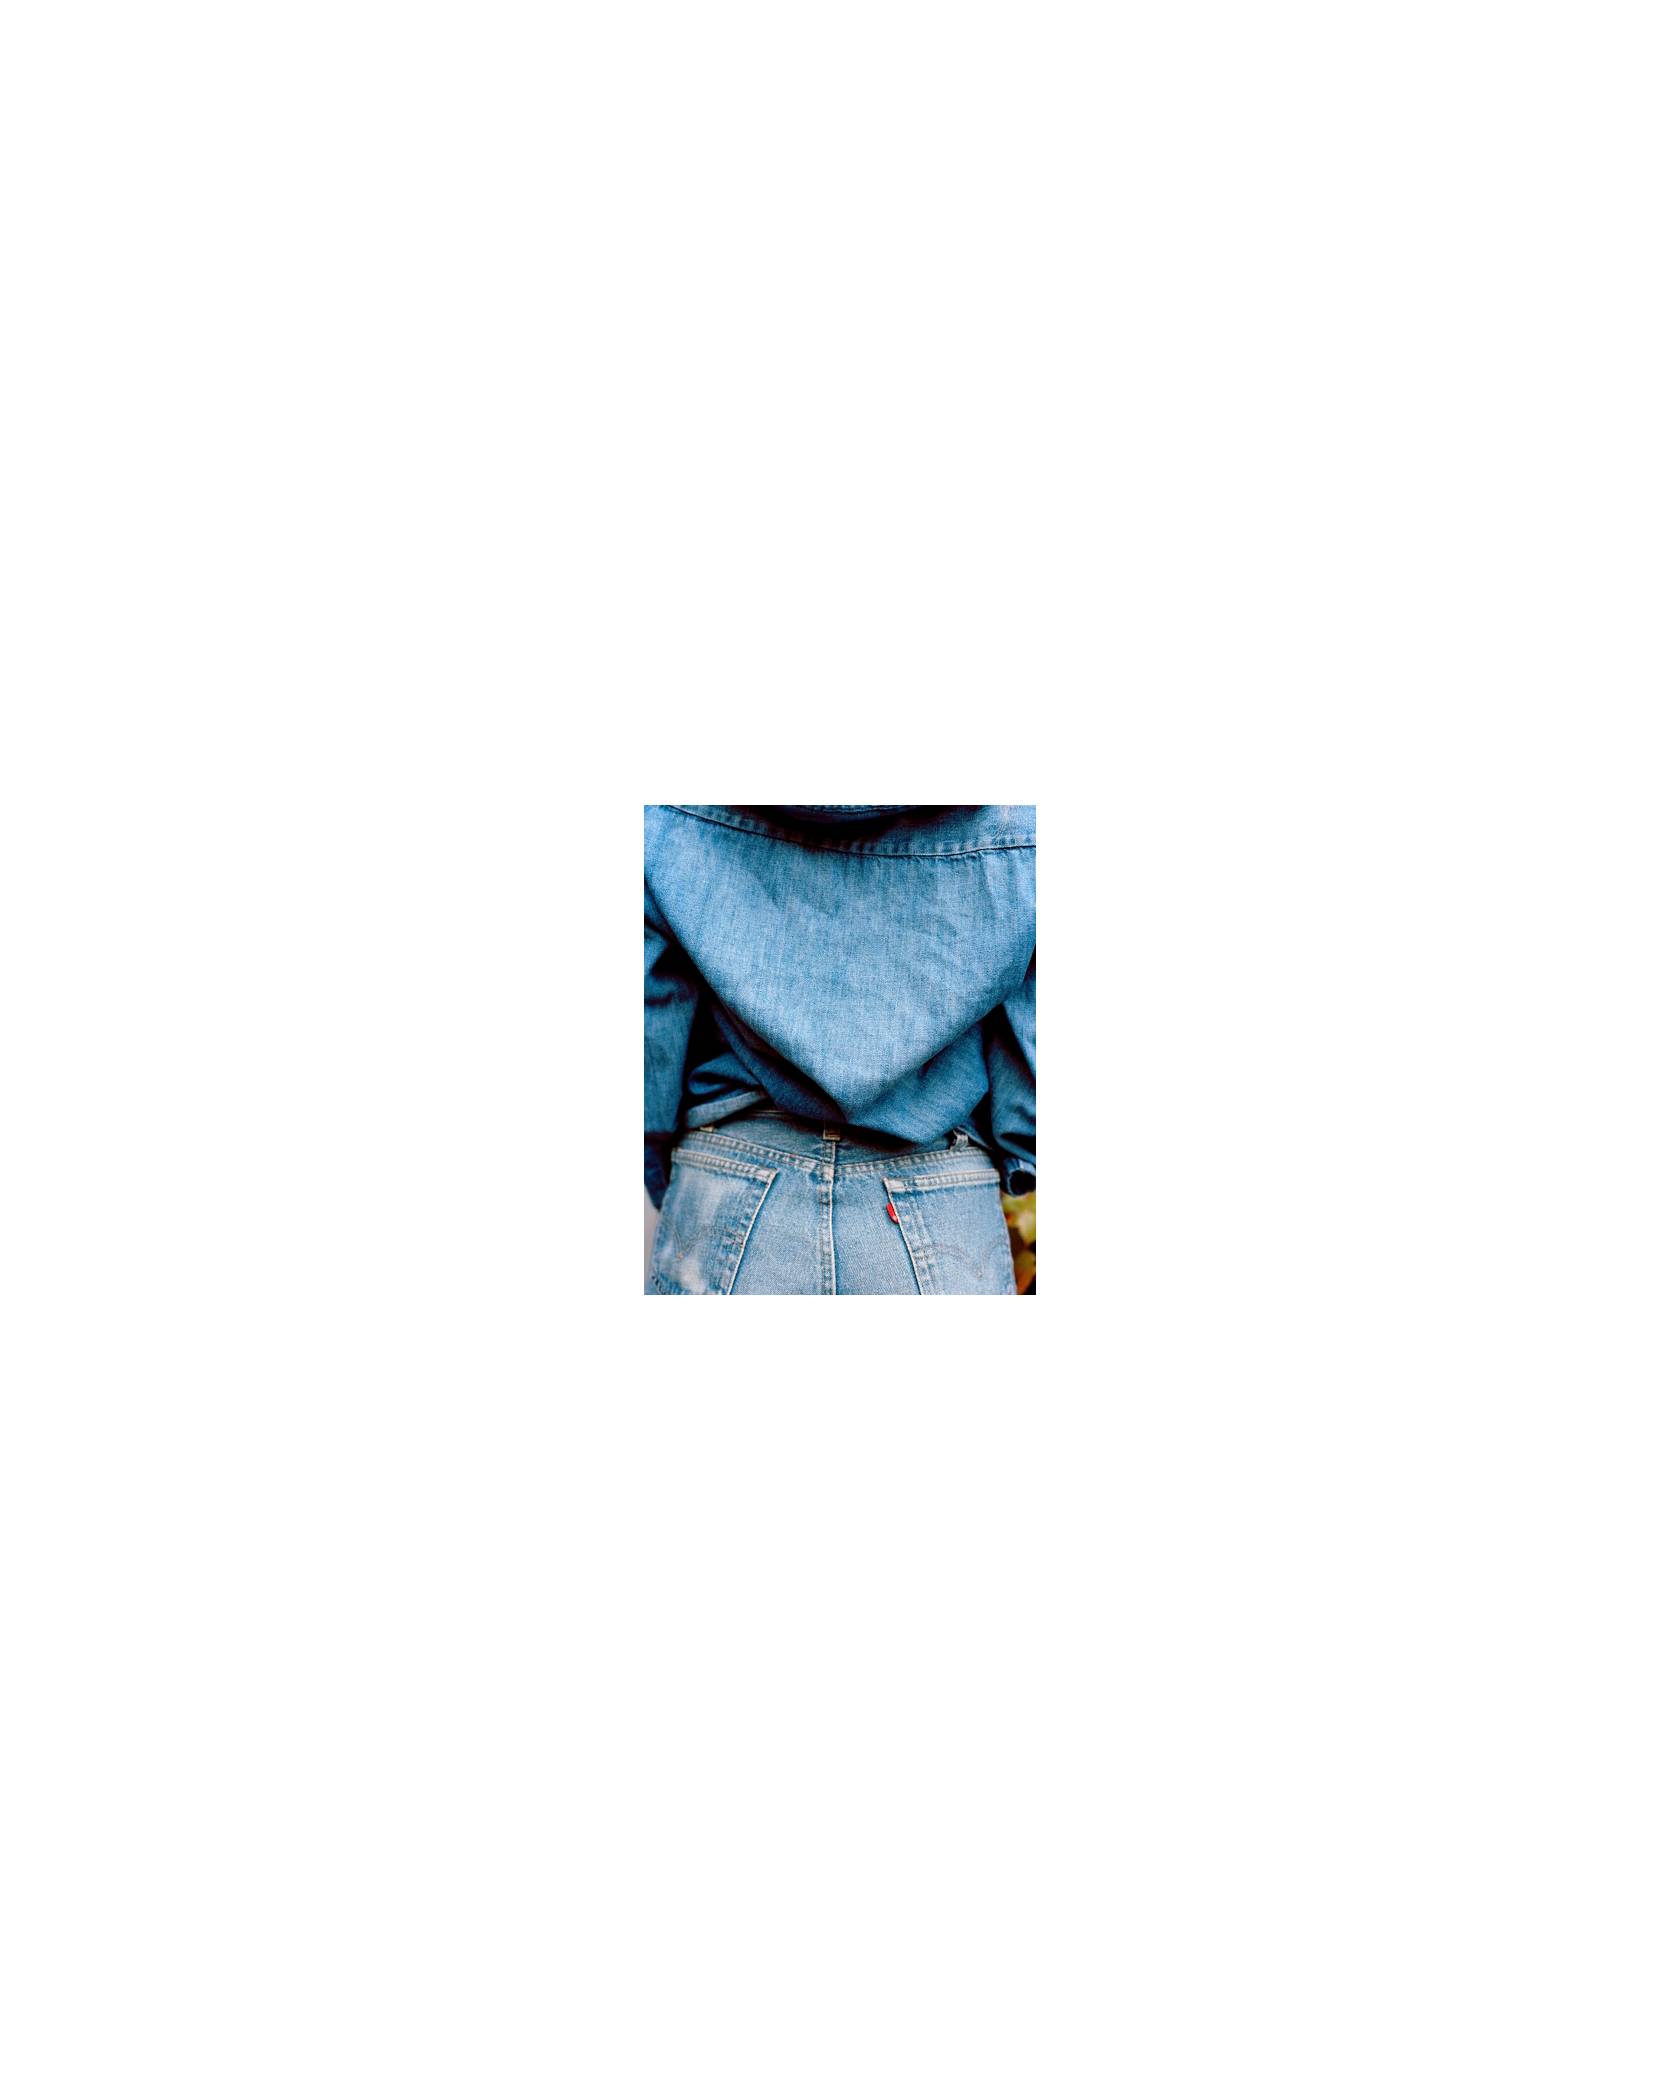 Image of a denim jacket and jeans.